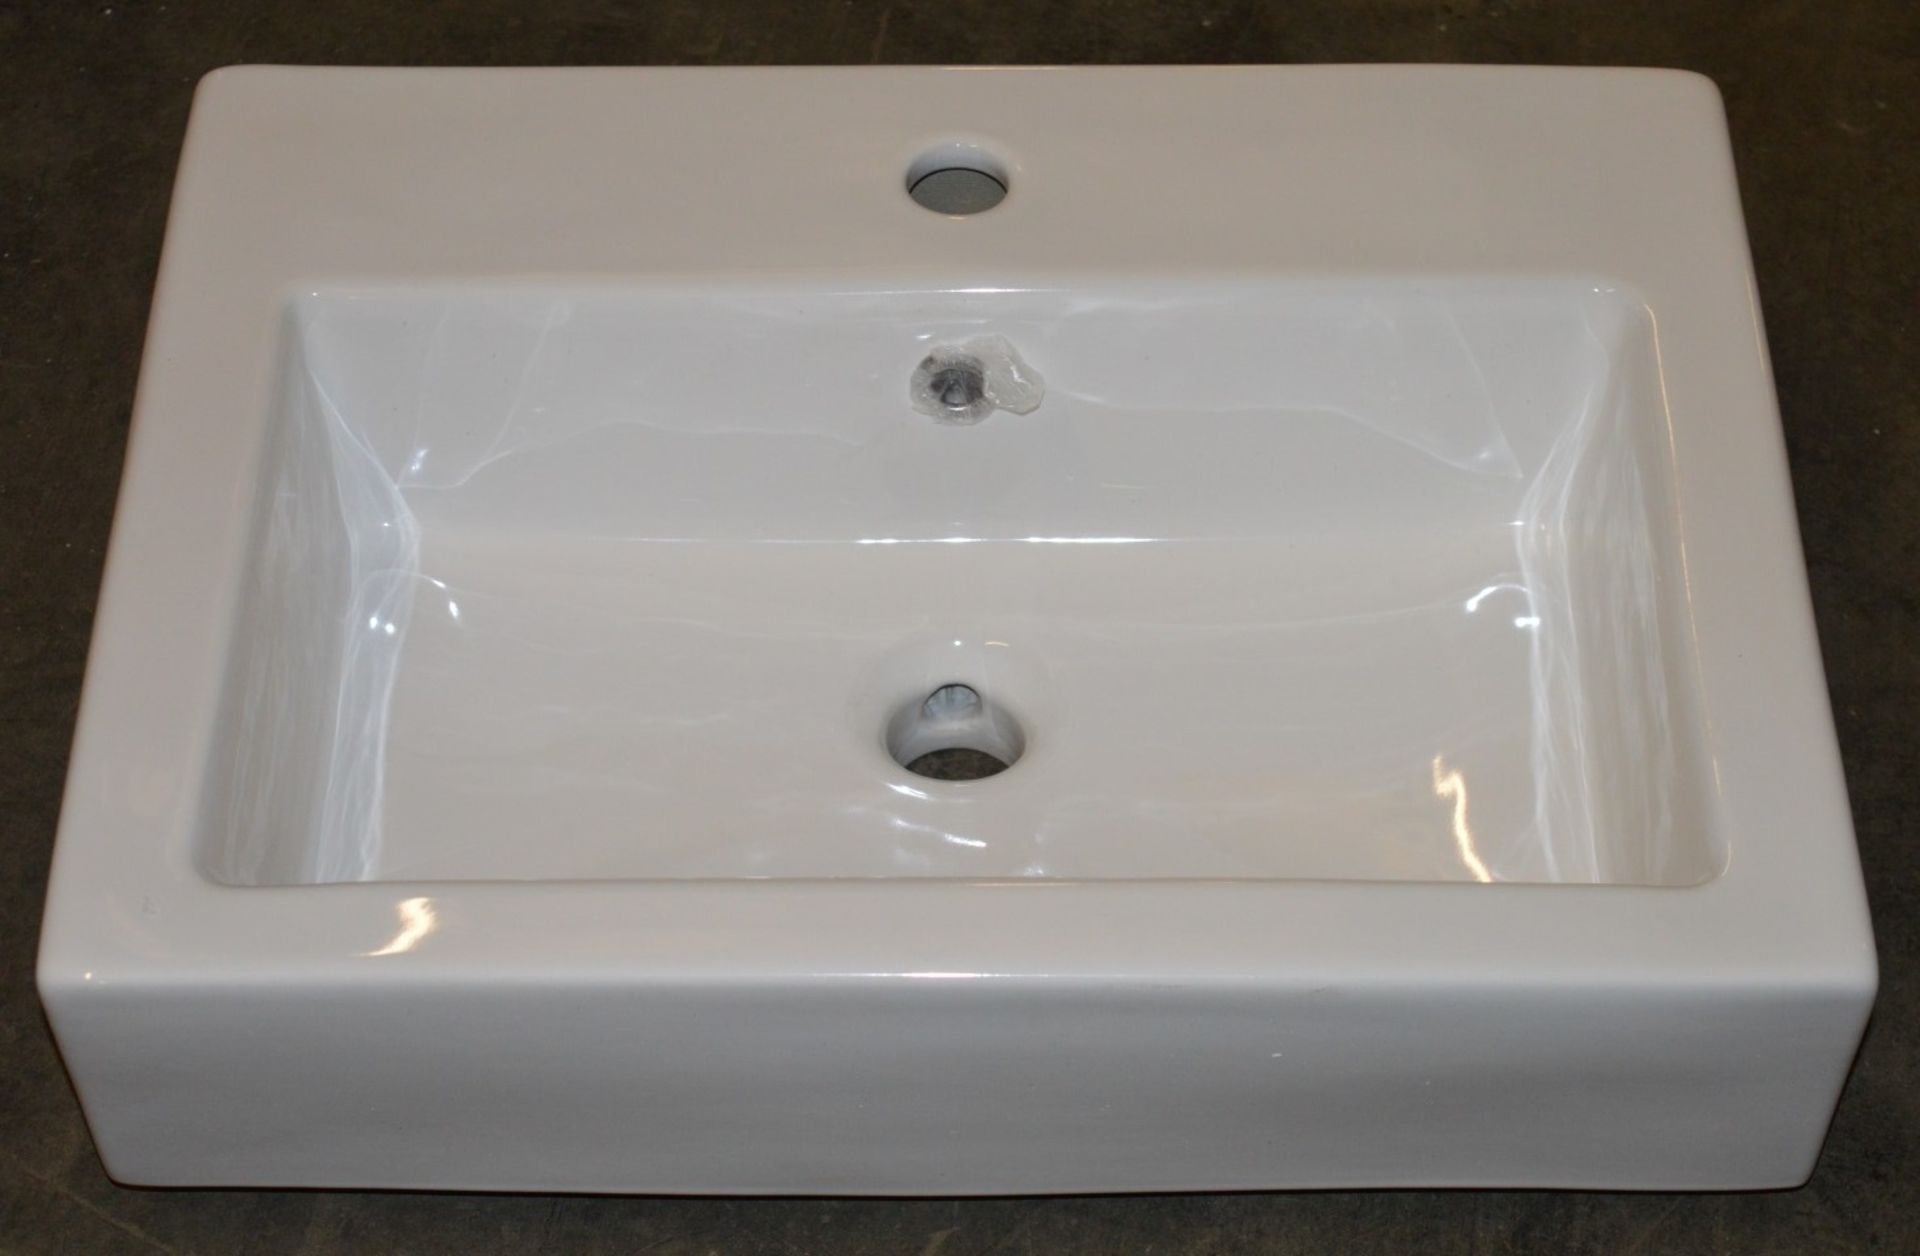 1 x Vogue Bathrooms ZEN Single Tap Hole SEMI RECESSED SINK BASIN - 550mm Width - Brand New Boxed - Image 3 of 5